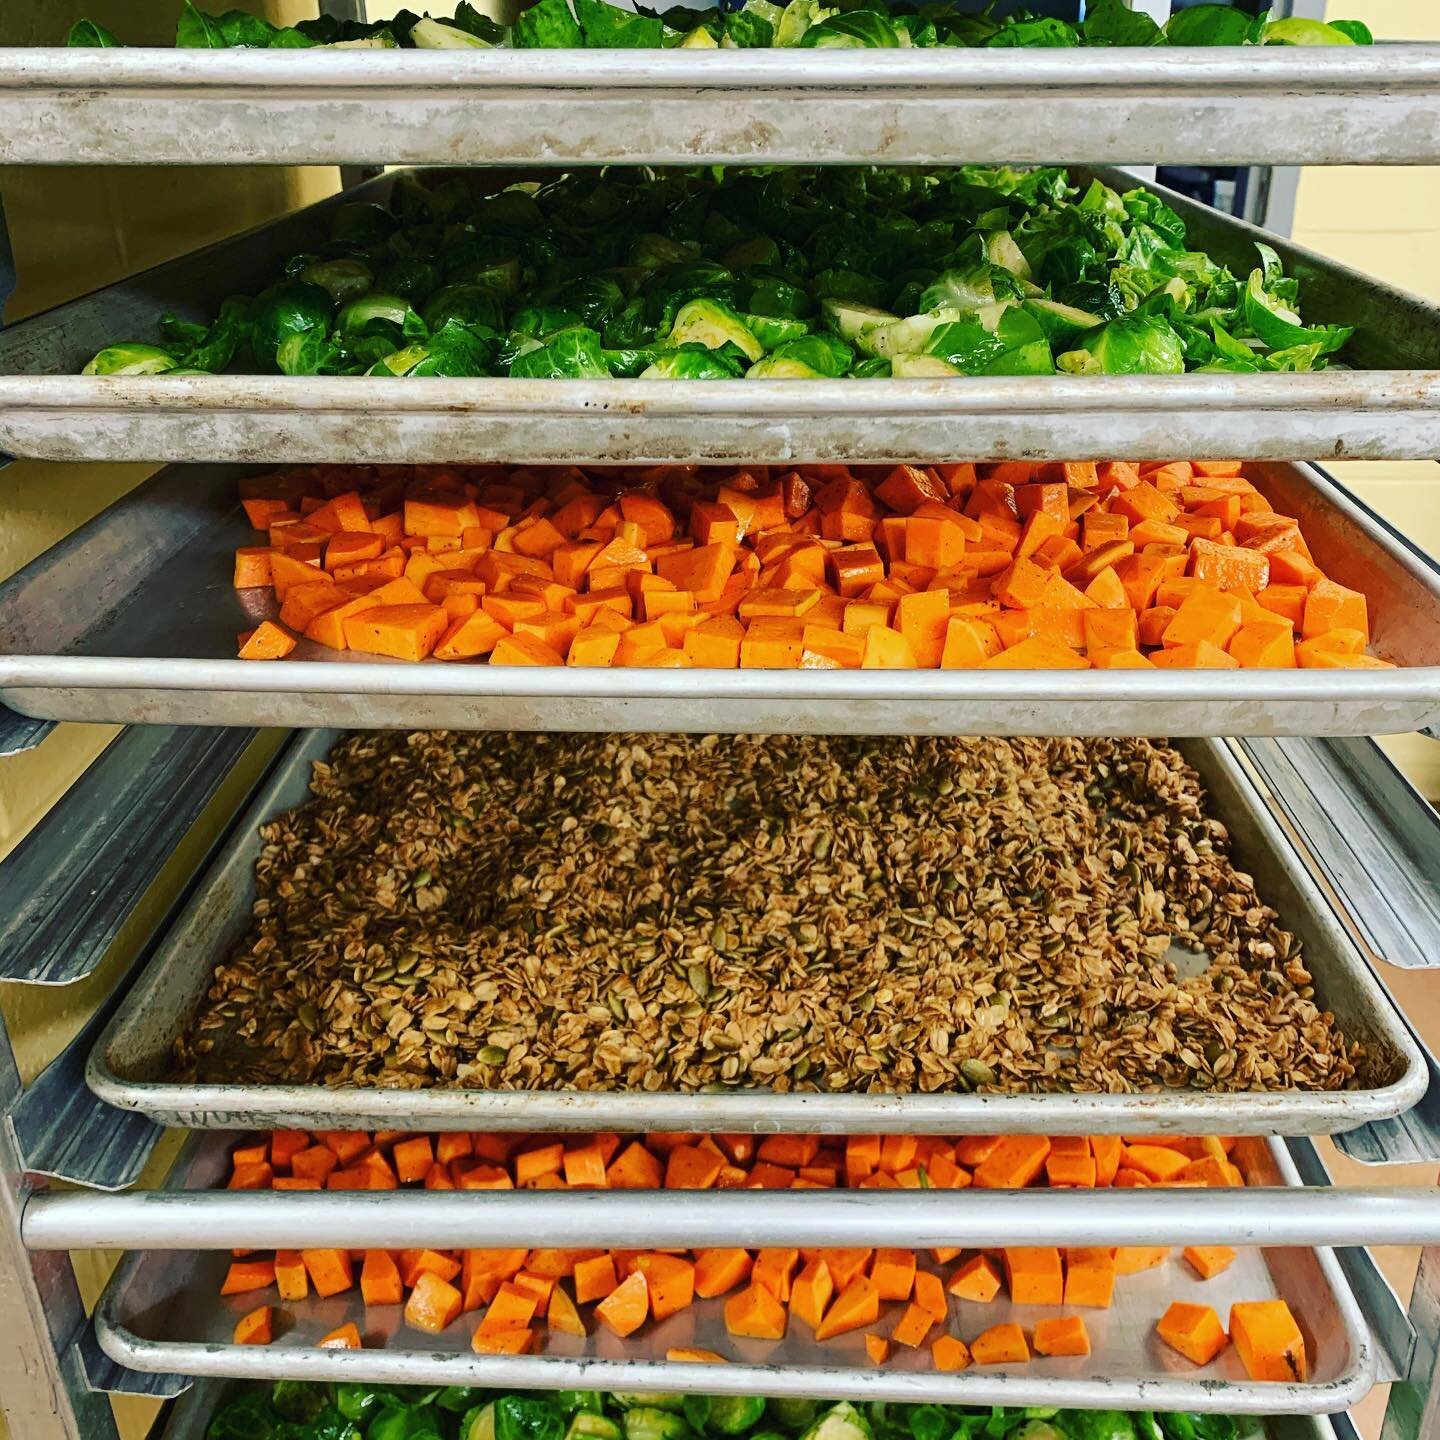 Ahhh, yes we are still here making fresh, nutritious, homemade healthy school meals for both on campus and off campus offerings! @vtschoolmeals 

Our team continues to dedicate their time to providing whole meals that nourish our students during thes